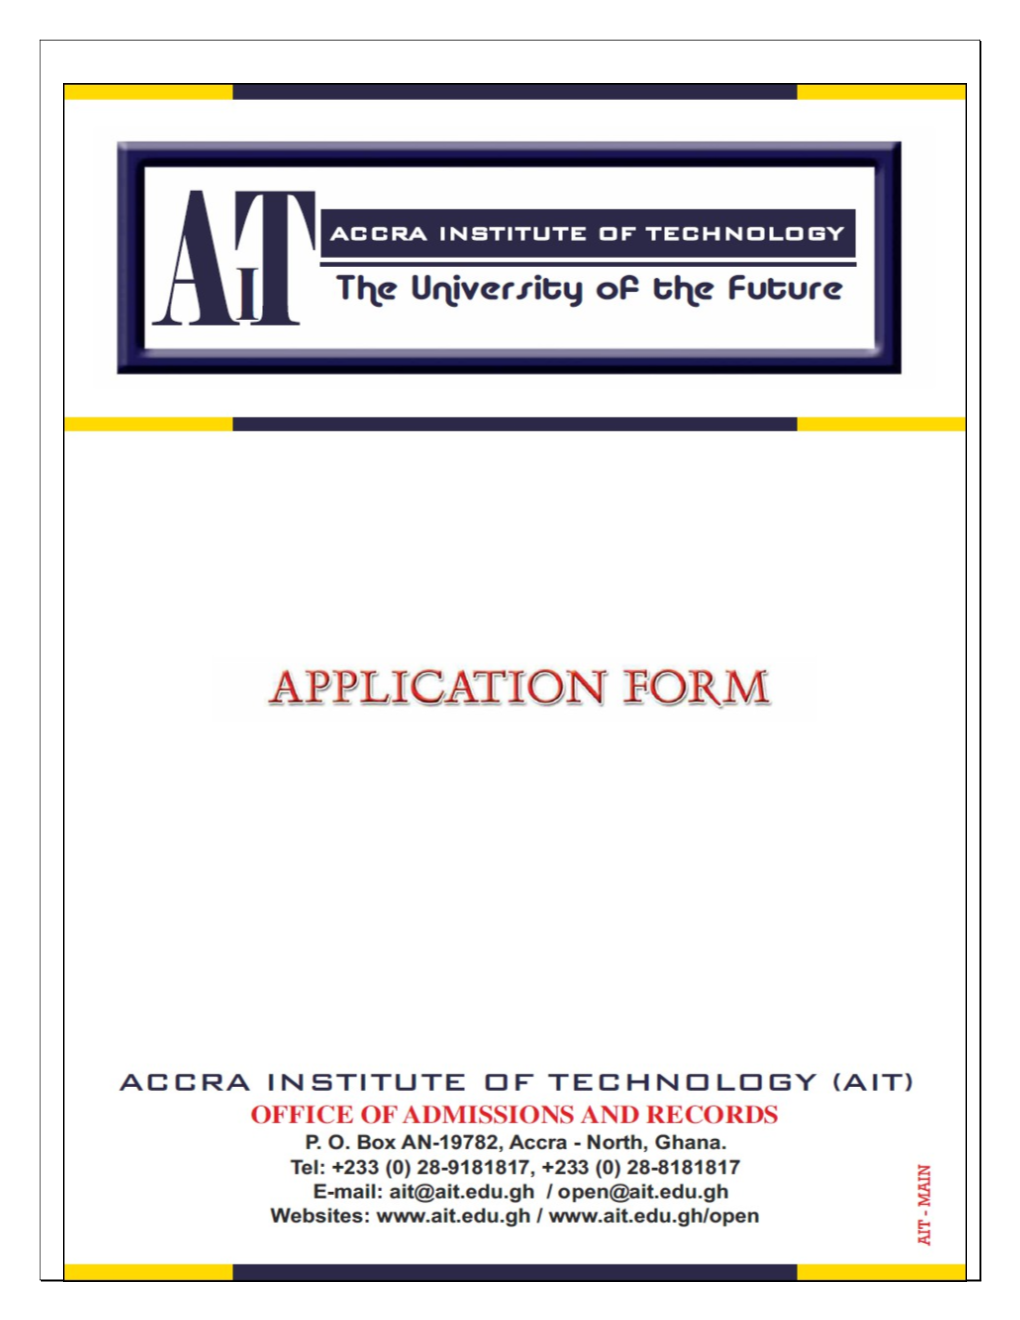 AIT-The University Of The Future